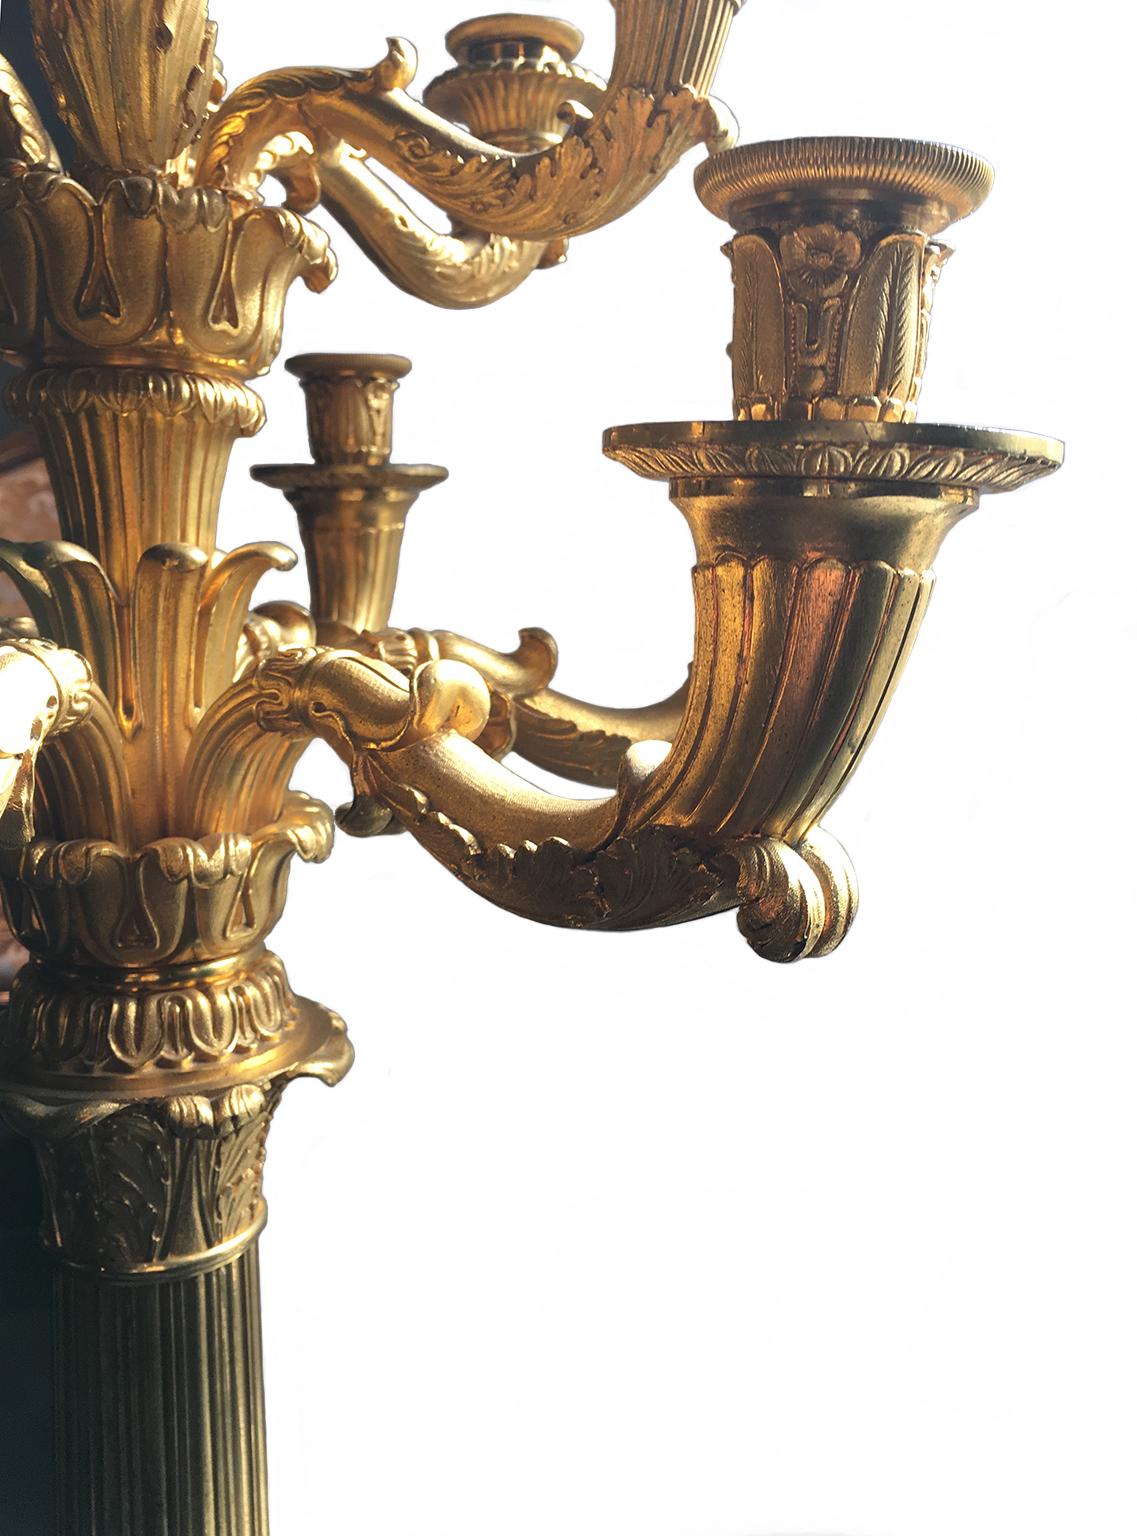 19th Century Pair of French or Russian Gilt Bronze Candelabra, circa 1830 For Sale 5